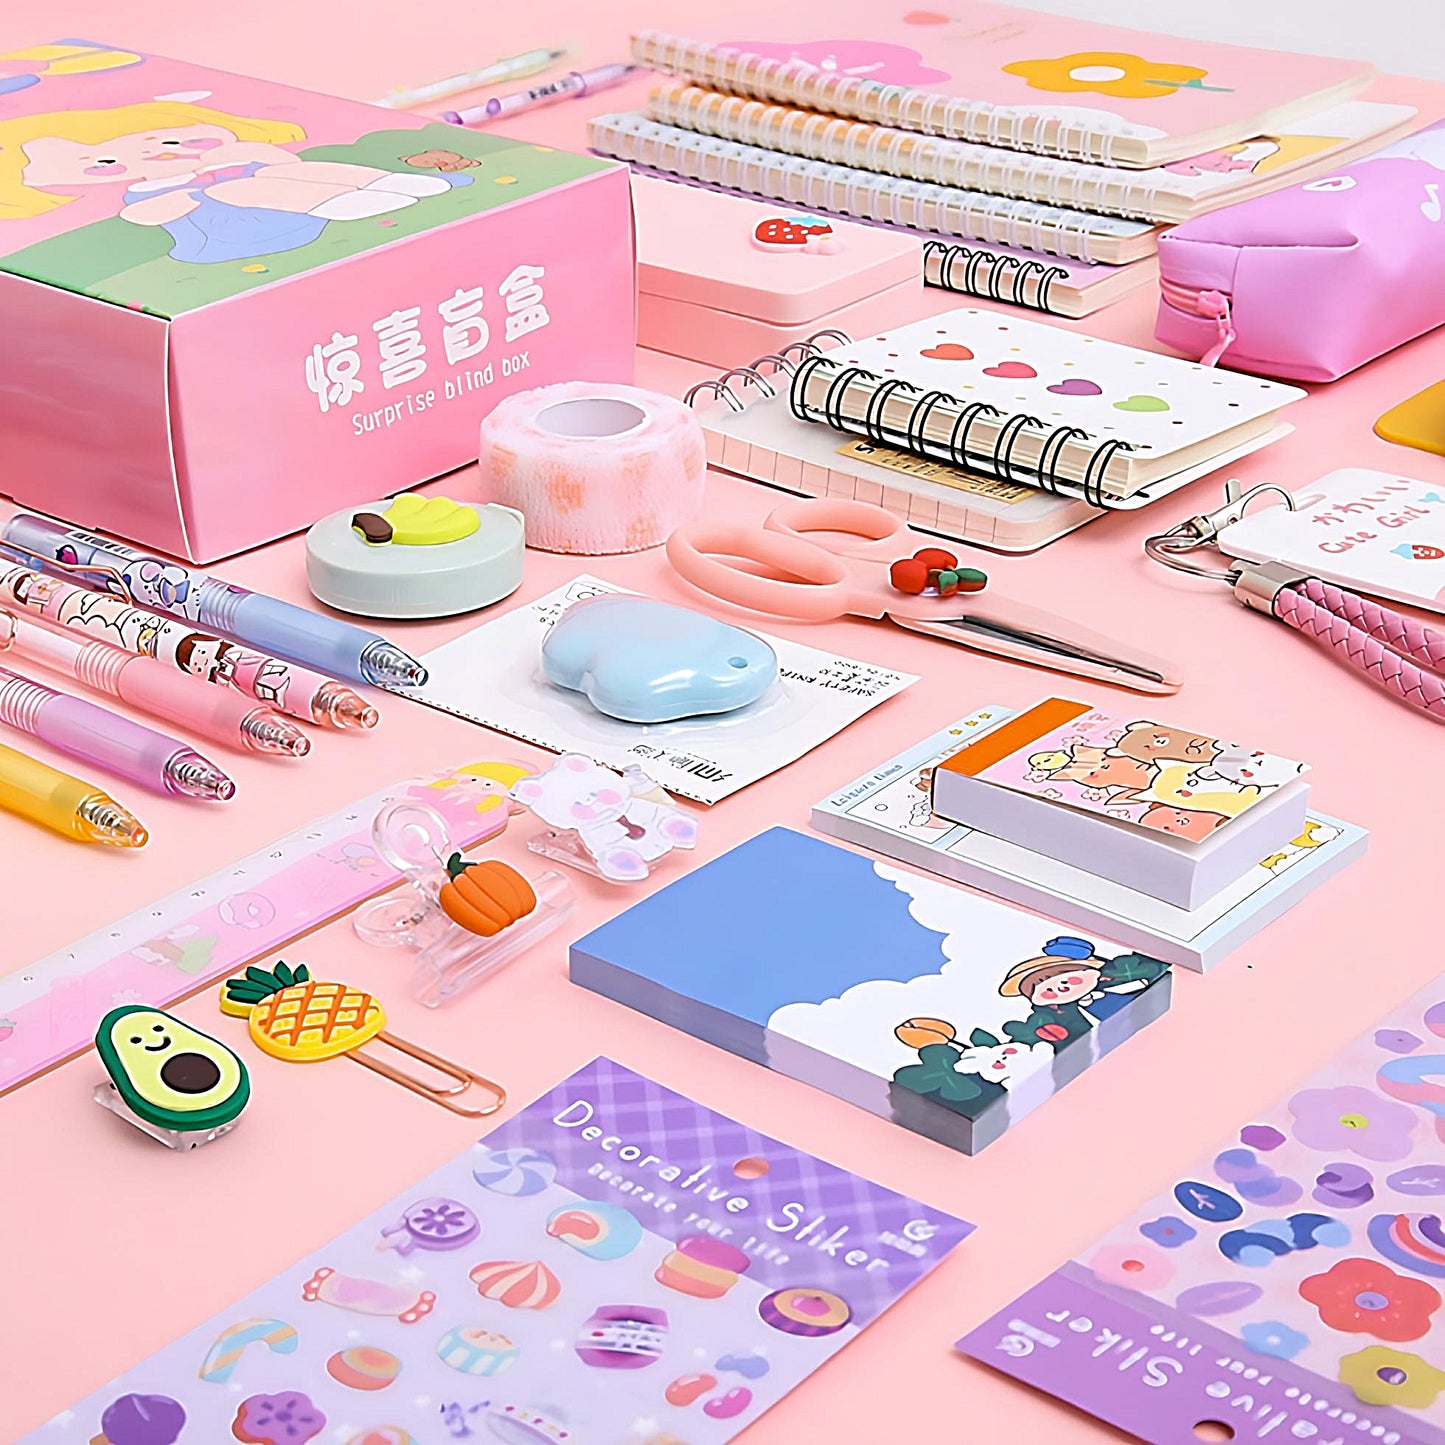 a pink Kawaii stationery blind box with the content besides, such as pens, sticky notes, scissors, ruler and notebooks